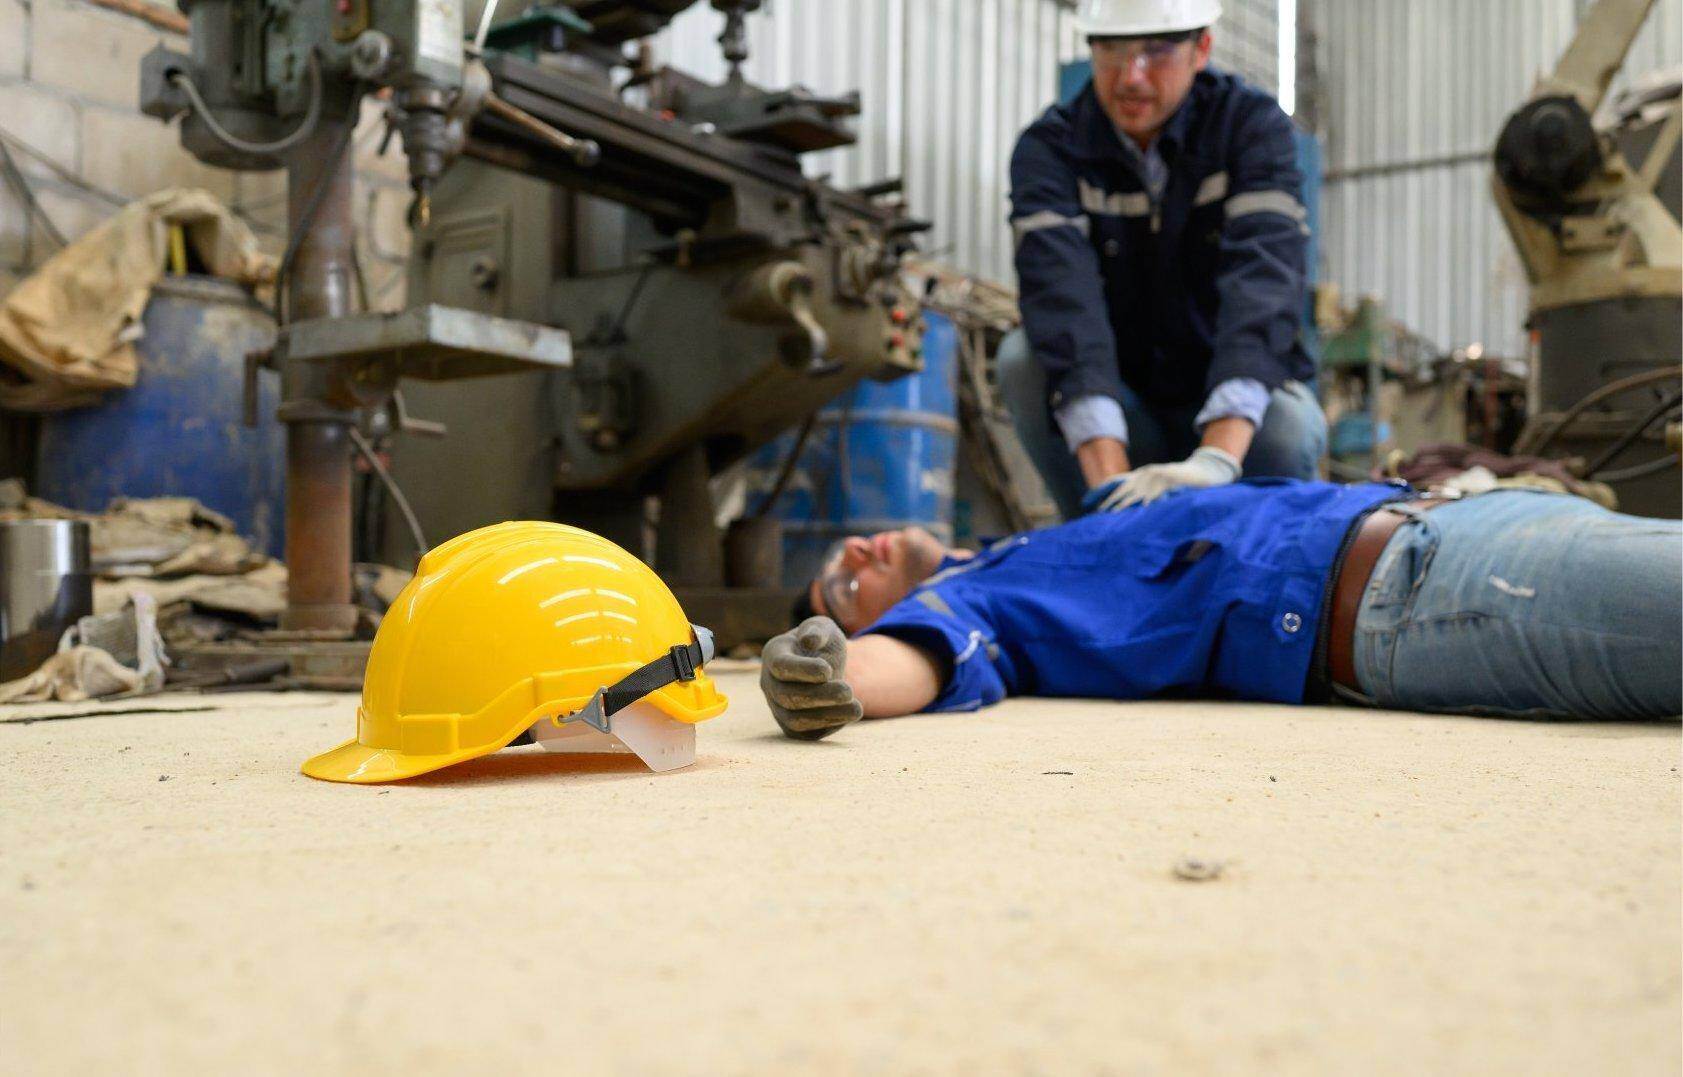 An unconscious man who has been injured on the job who will file for workers compensation in Holly Springs, Georgia